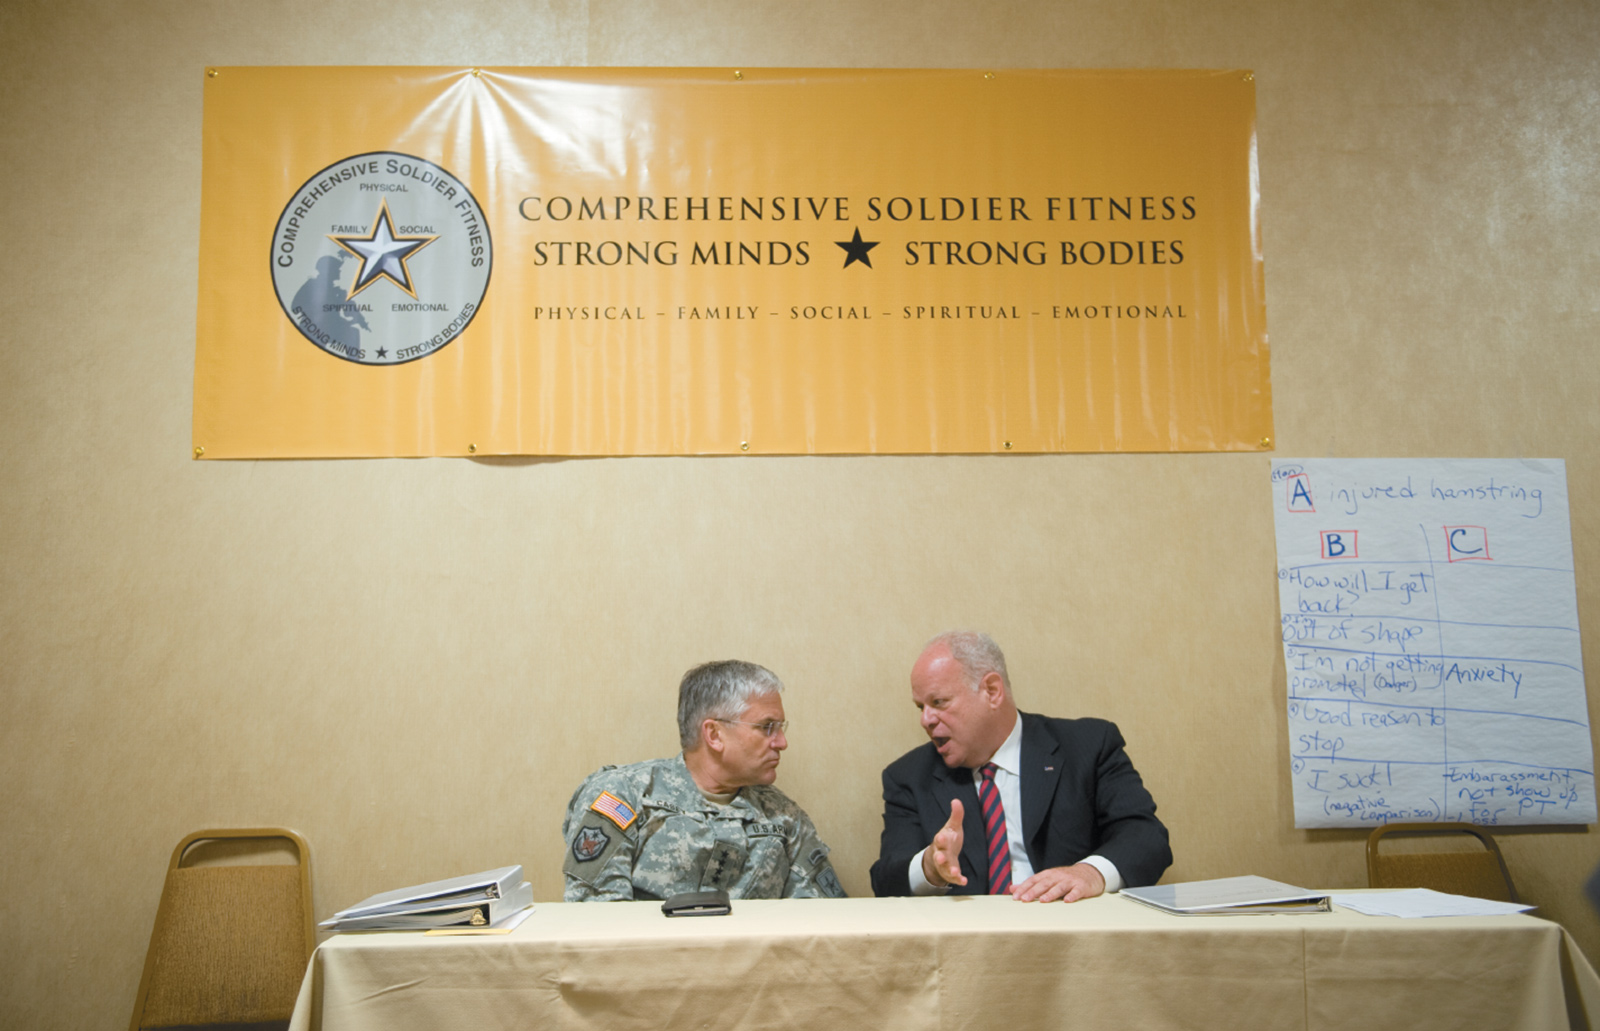 Army Chief of Staff General George W. Casey with Martin Seligman, the founder of the Positive Psychology movement and developer of the theory of ‘learned helplessness,’ at the Comprehensive Soldier Fitness program at the University of Pennsylvania, Philadelphia, May 2009